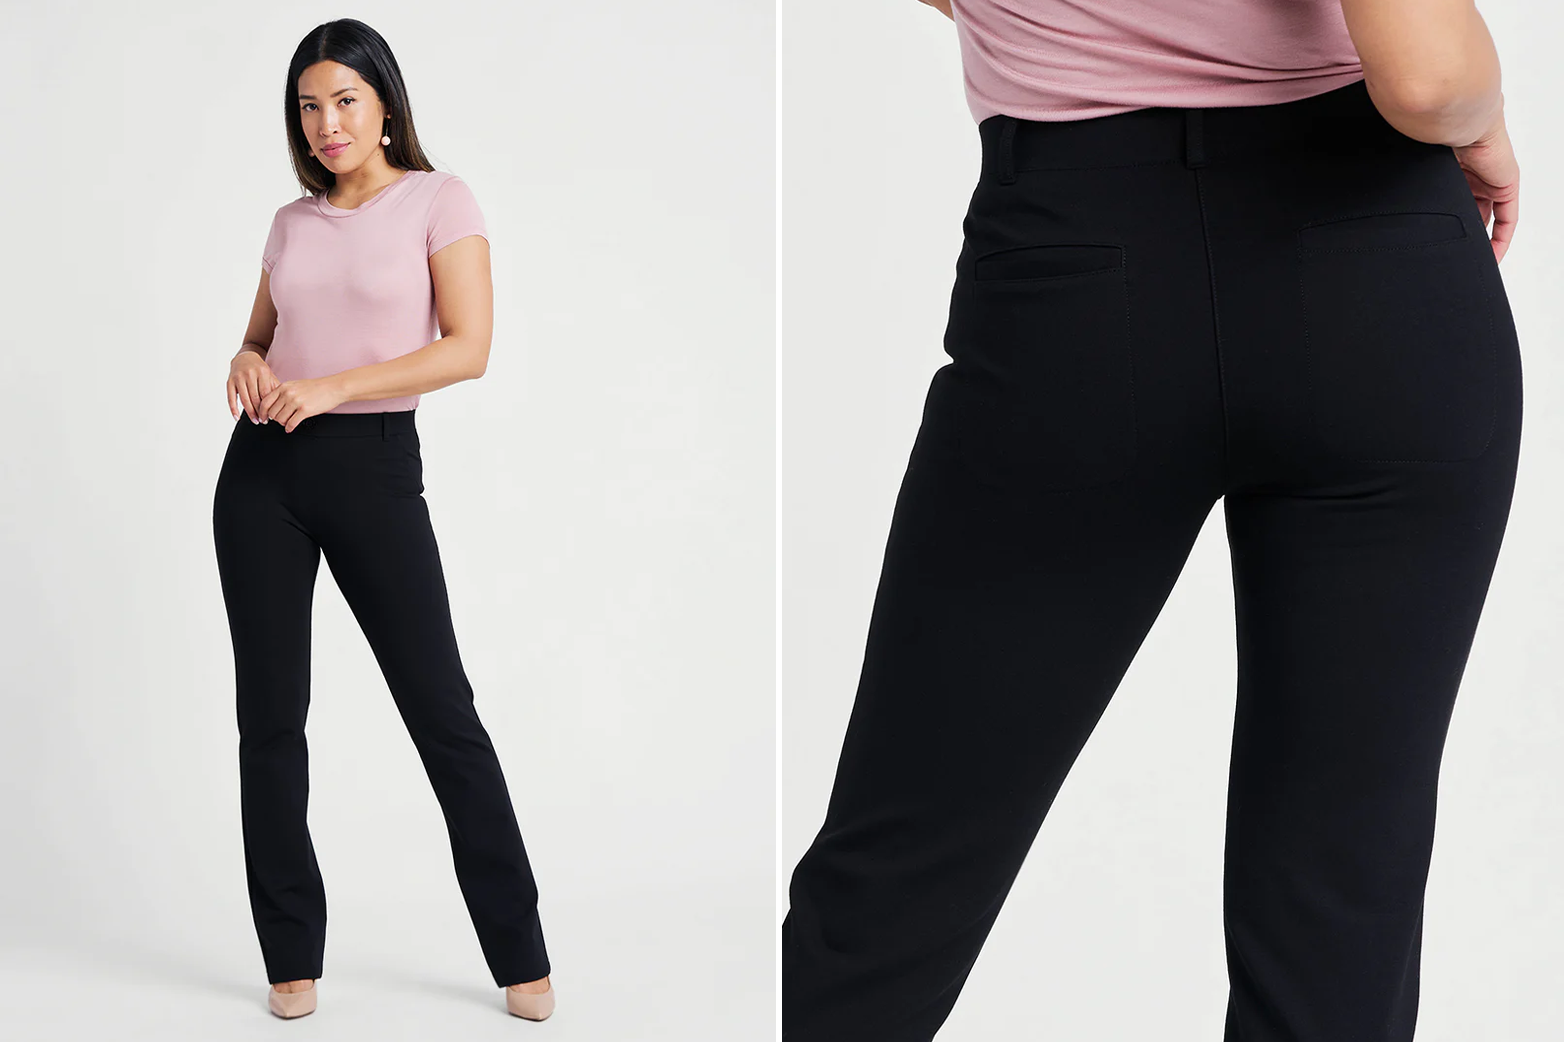 Female in pink top modeling black Betabrand Dress Pant Yoga Pants front and back